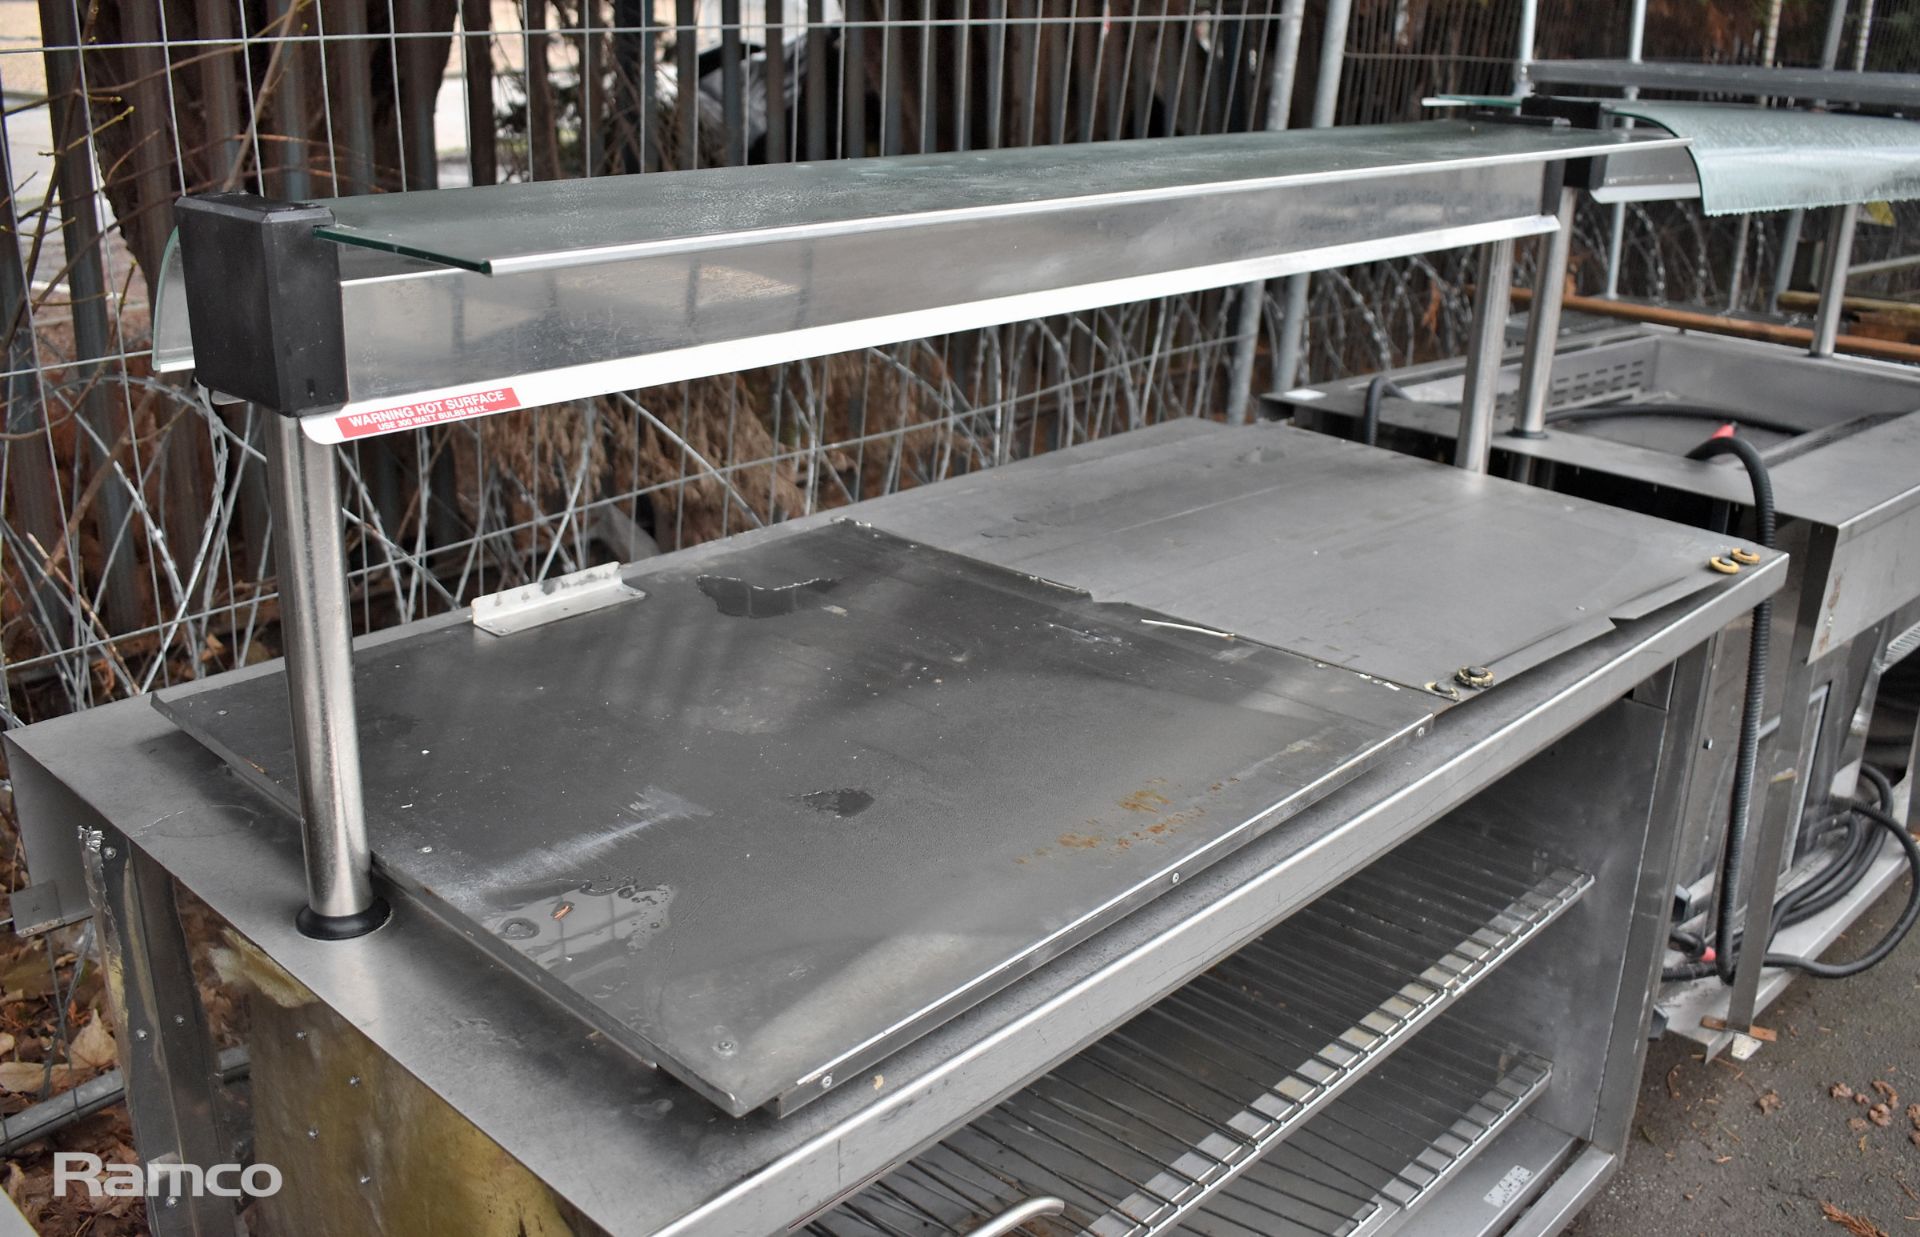 Moffat stainless steel bain marie with heated gantry - L155 x W80 x H132cm - Image 11 of 17